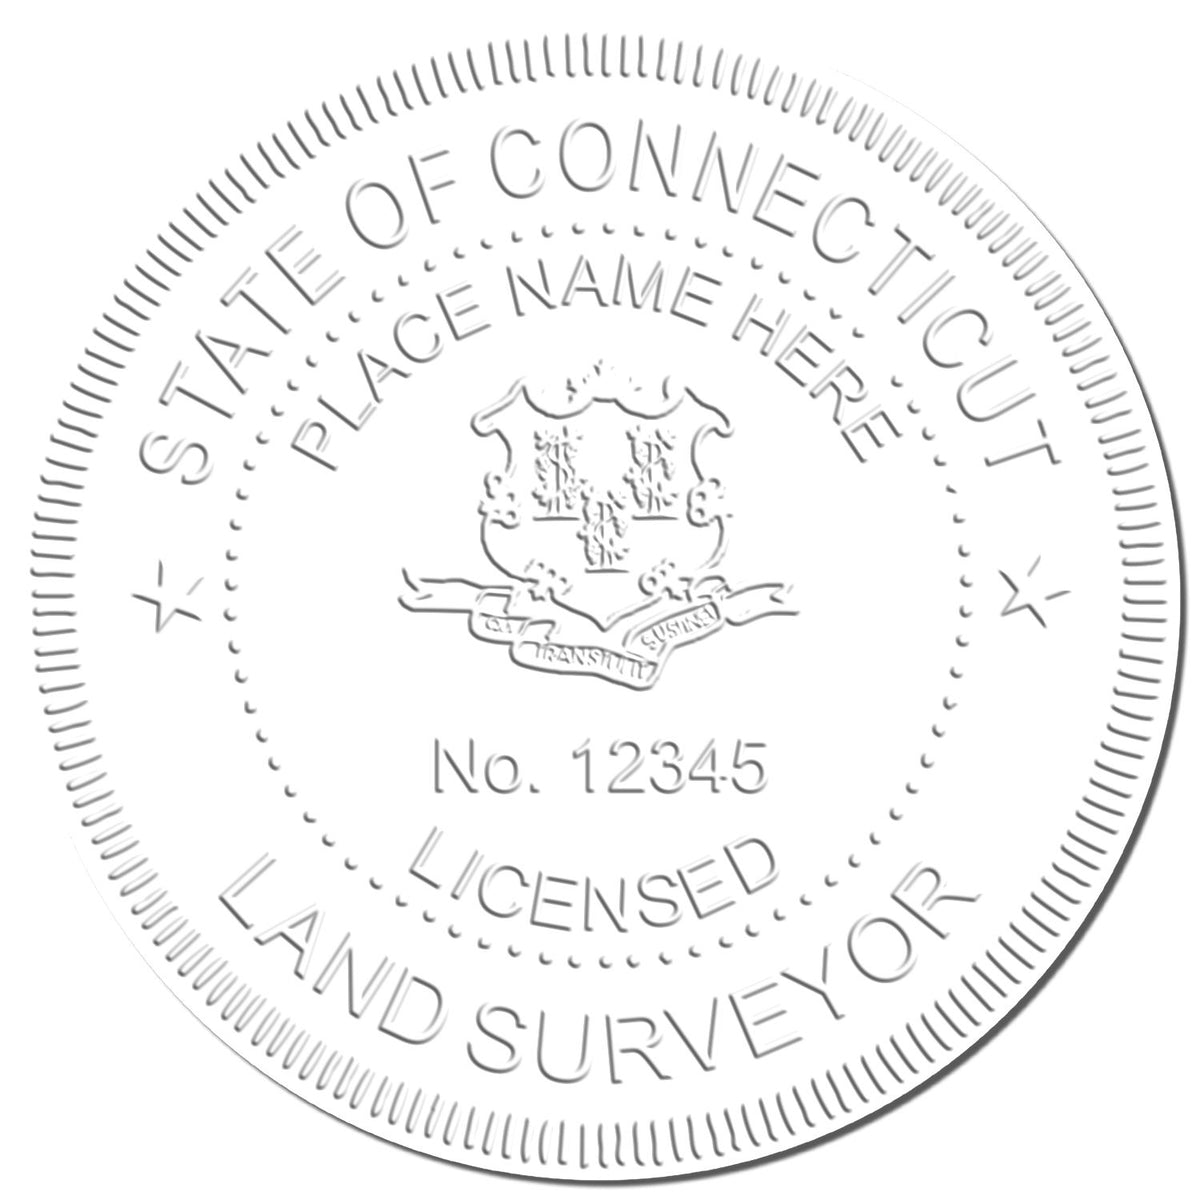 This paper is stamped with a sample imprint of the Hybrid Connecticut Land Surveyor Seal, signifying its quality and reliability.